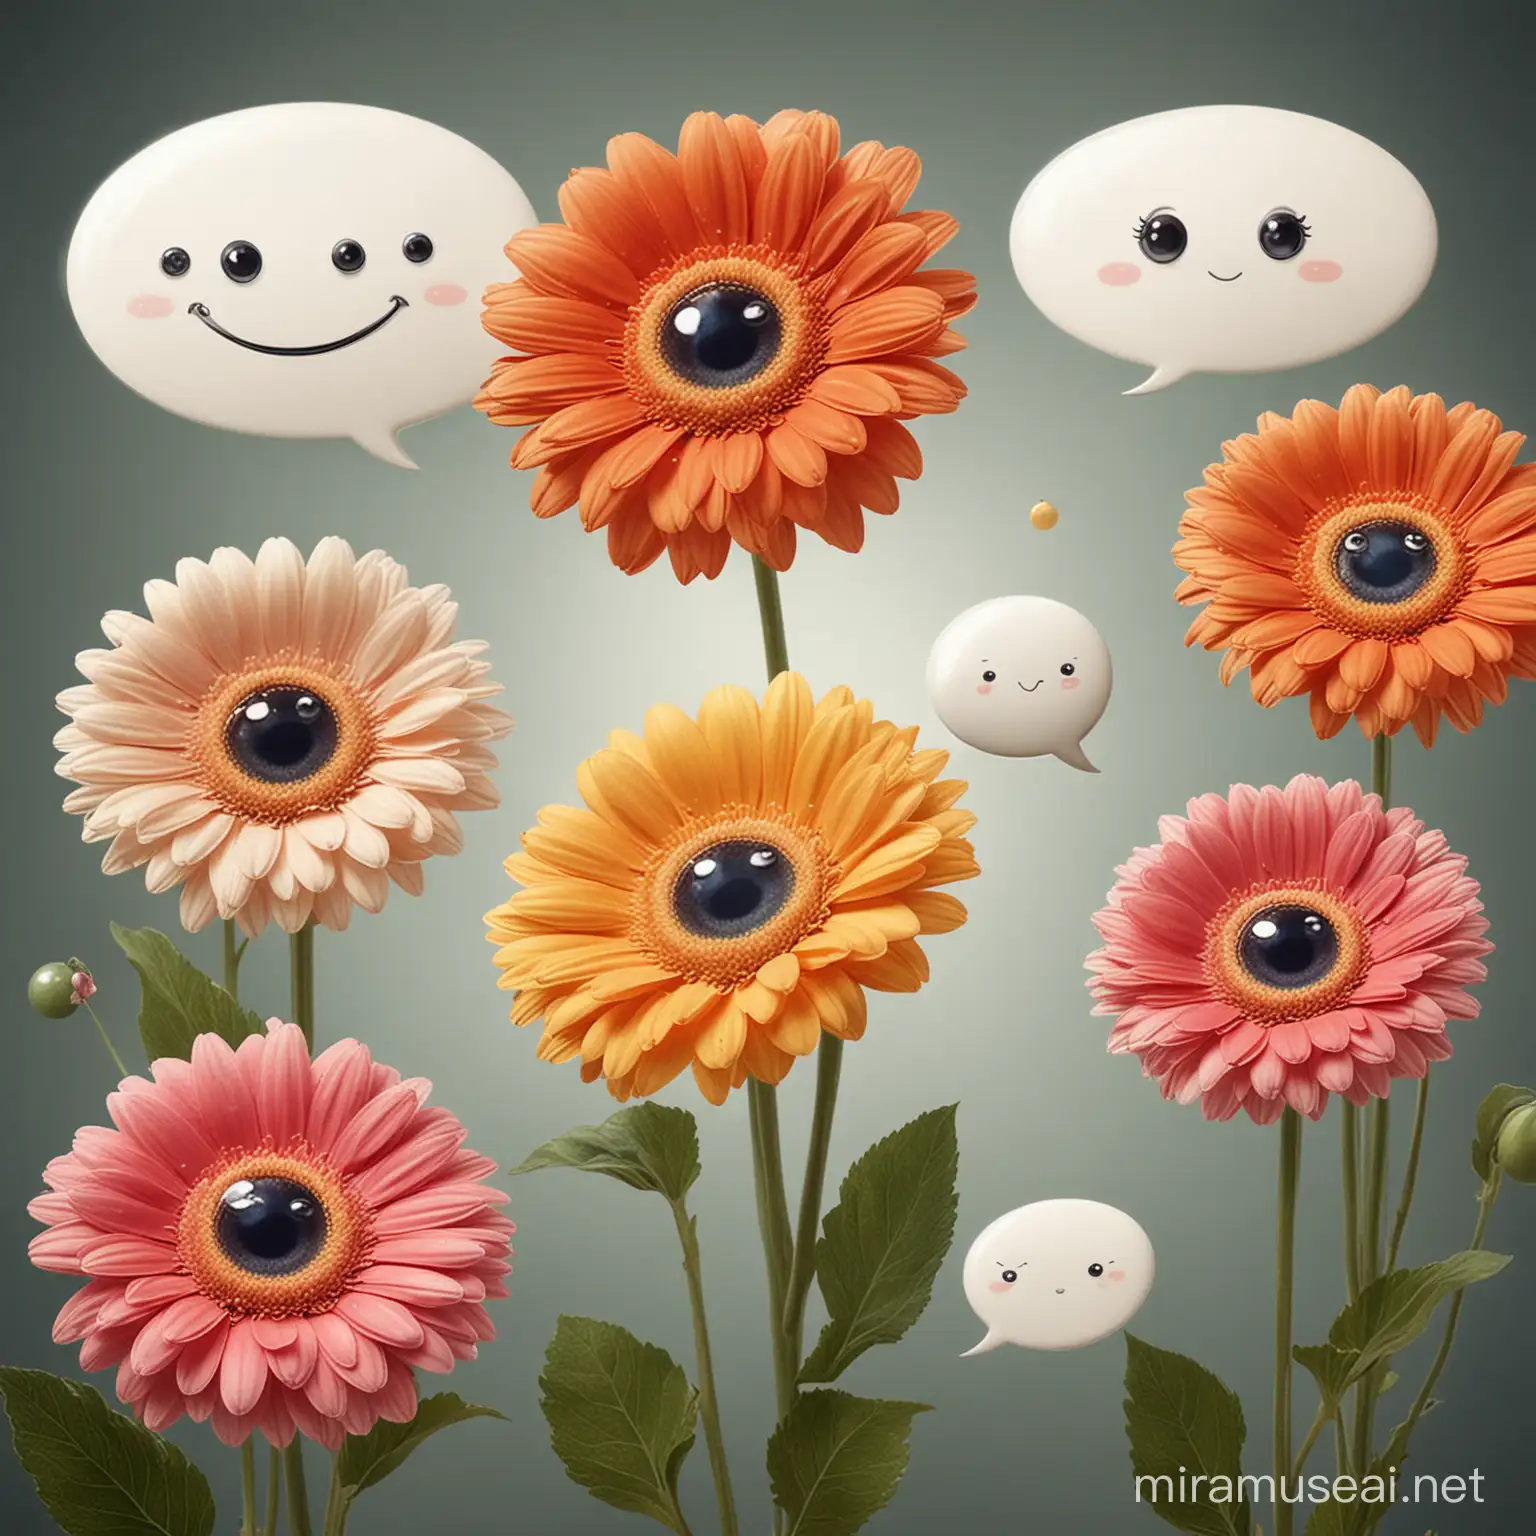 gerberas in fairy tale style with mouth and eyes whith speach bubbles 